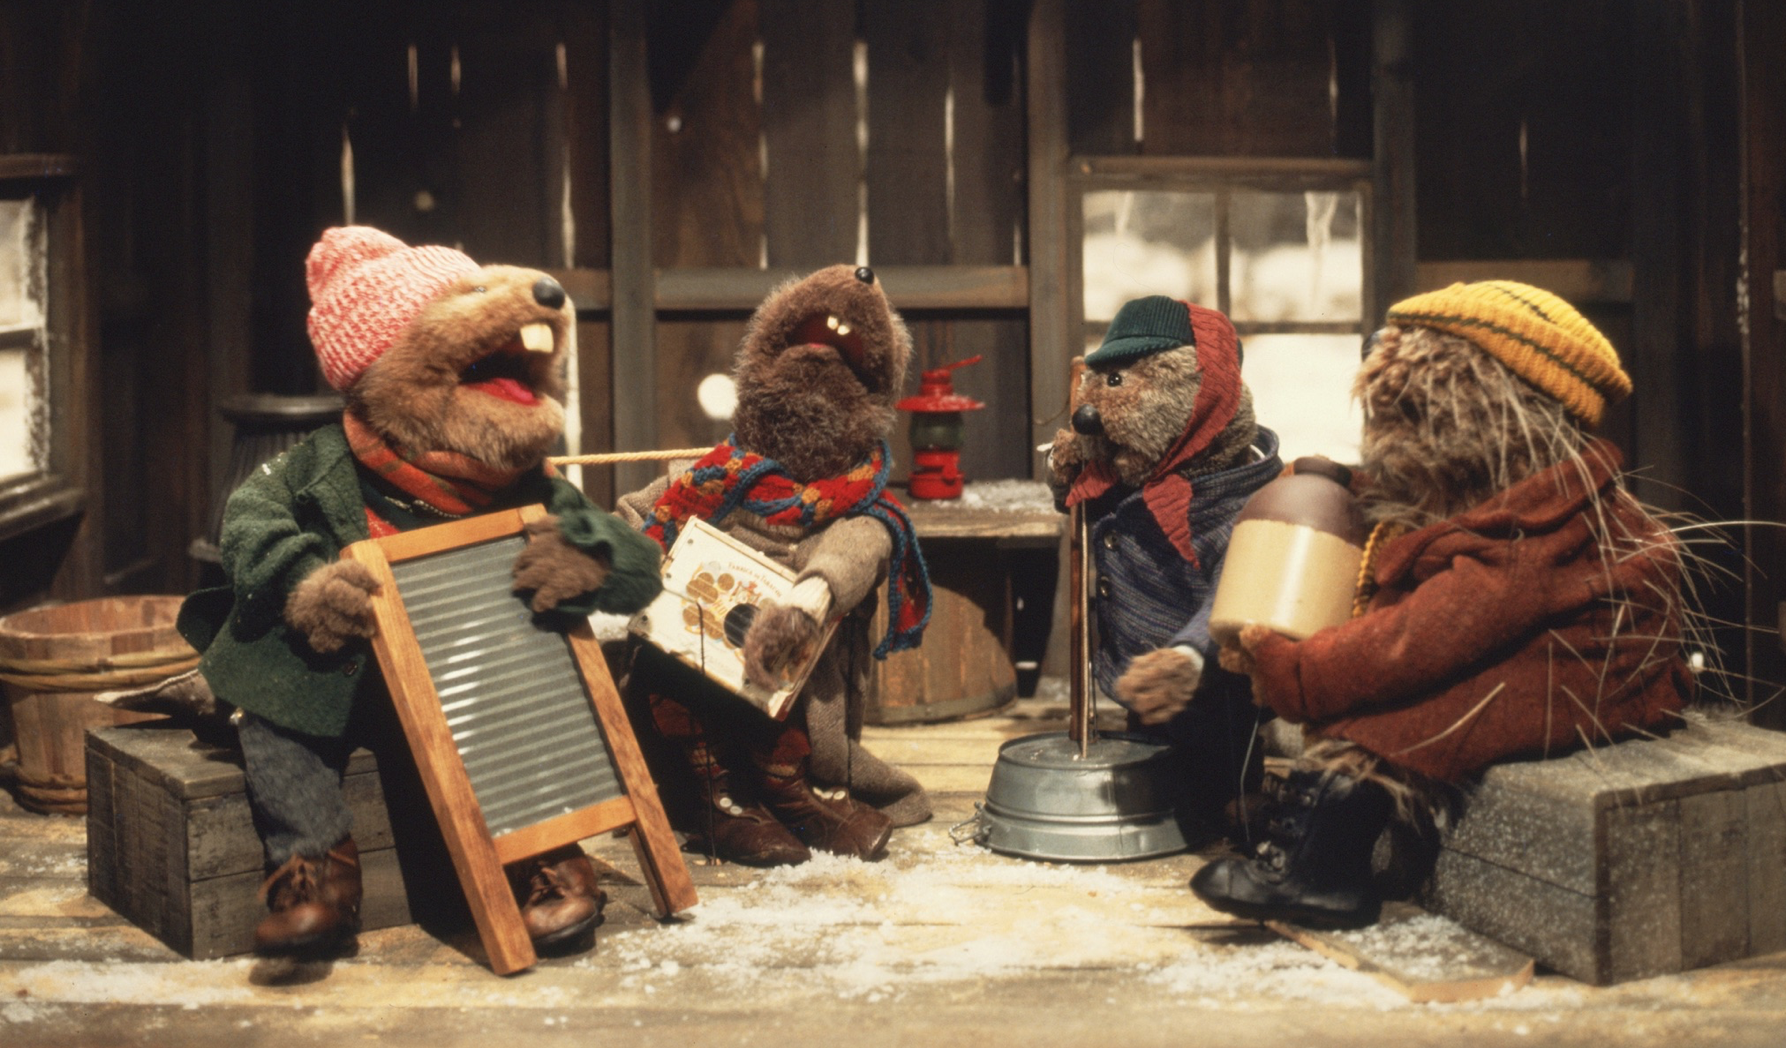 Celebrate the Holidays with Emmet Otter’s Jug-Band Christmas & Fraggle Rock